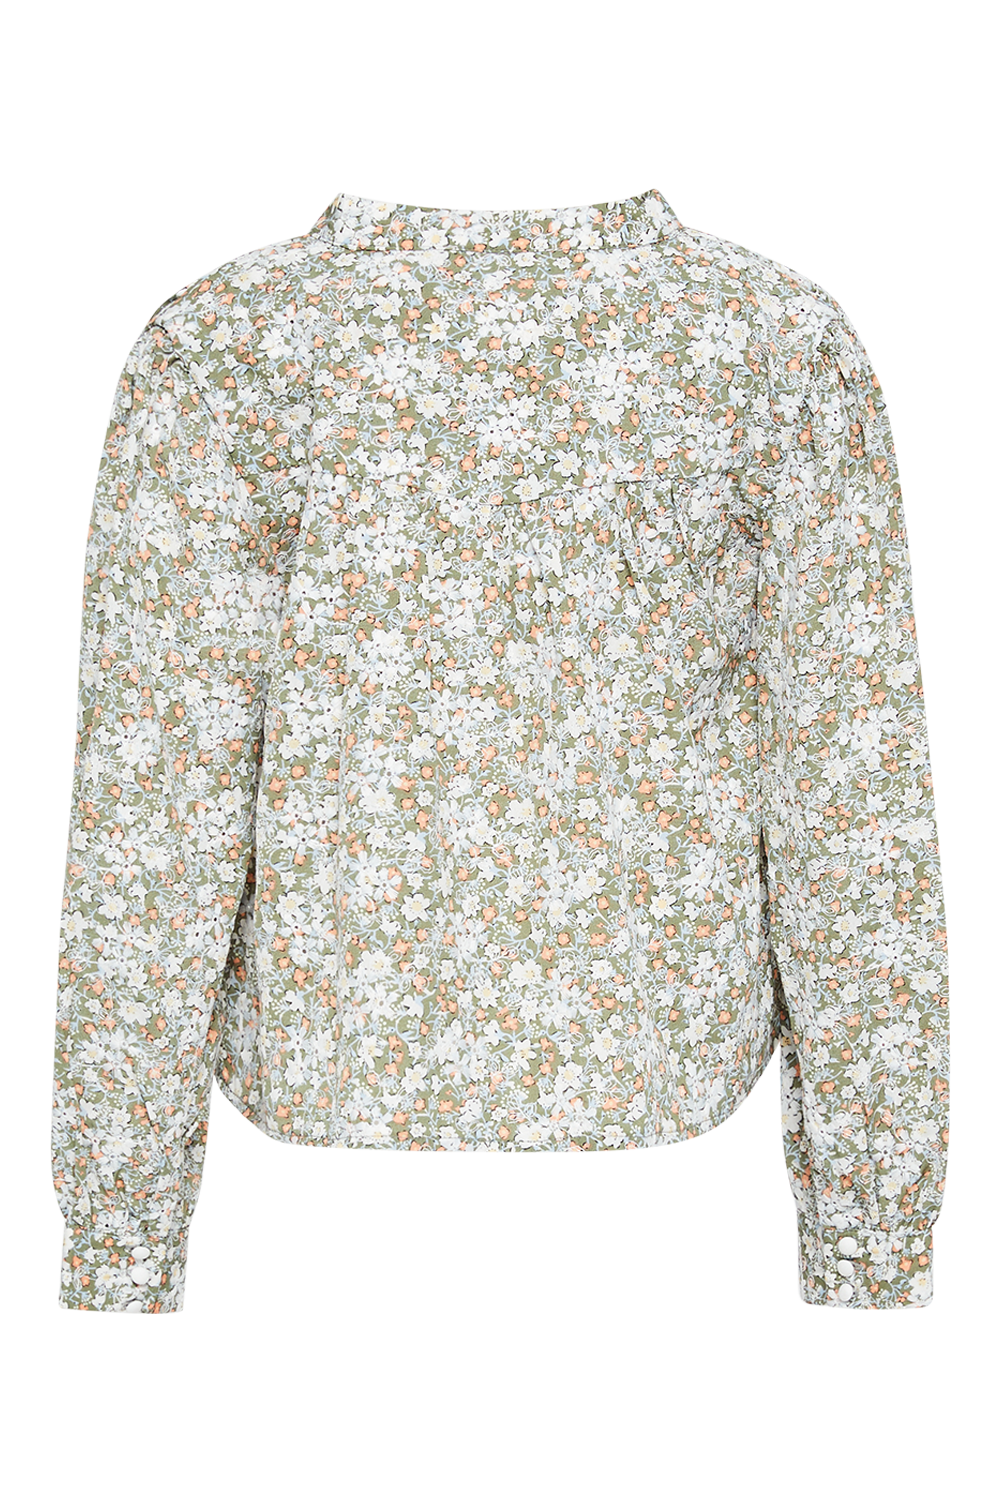 GIRLS SERENITY FLORAL SHIRT in colour BURNT OLIVE